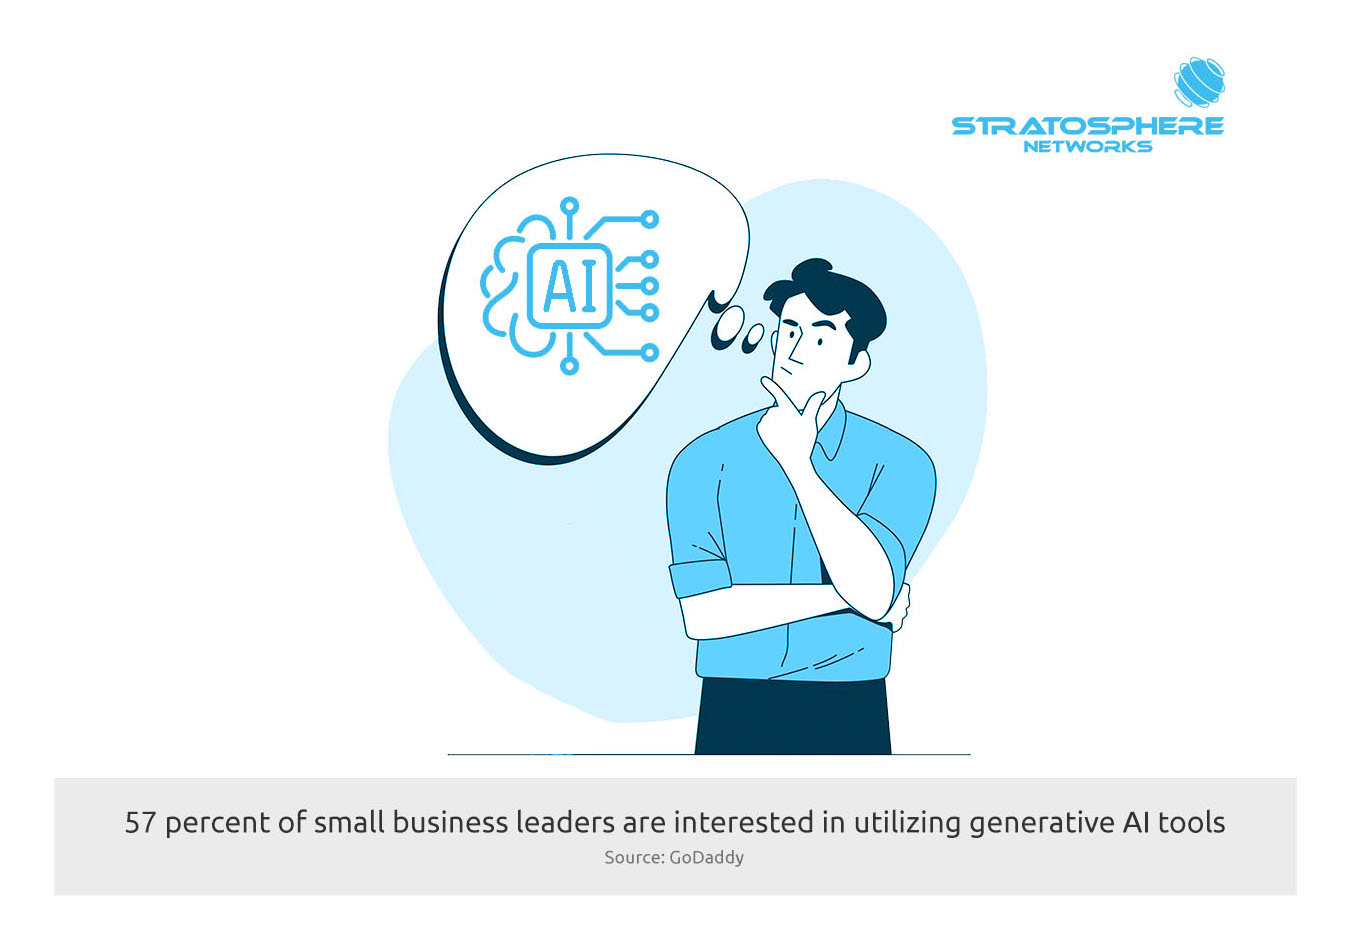 An illustration of a man with his hand held to his chin in a classic thinking pose. His thought bubble contains a circuit diagram labeled "AI." Text below the illustration states, "57 percent of small business leaders are interested in utilizing generative AI tools (Source: GoDaddy)."